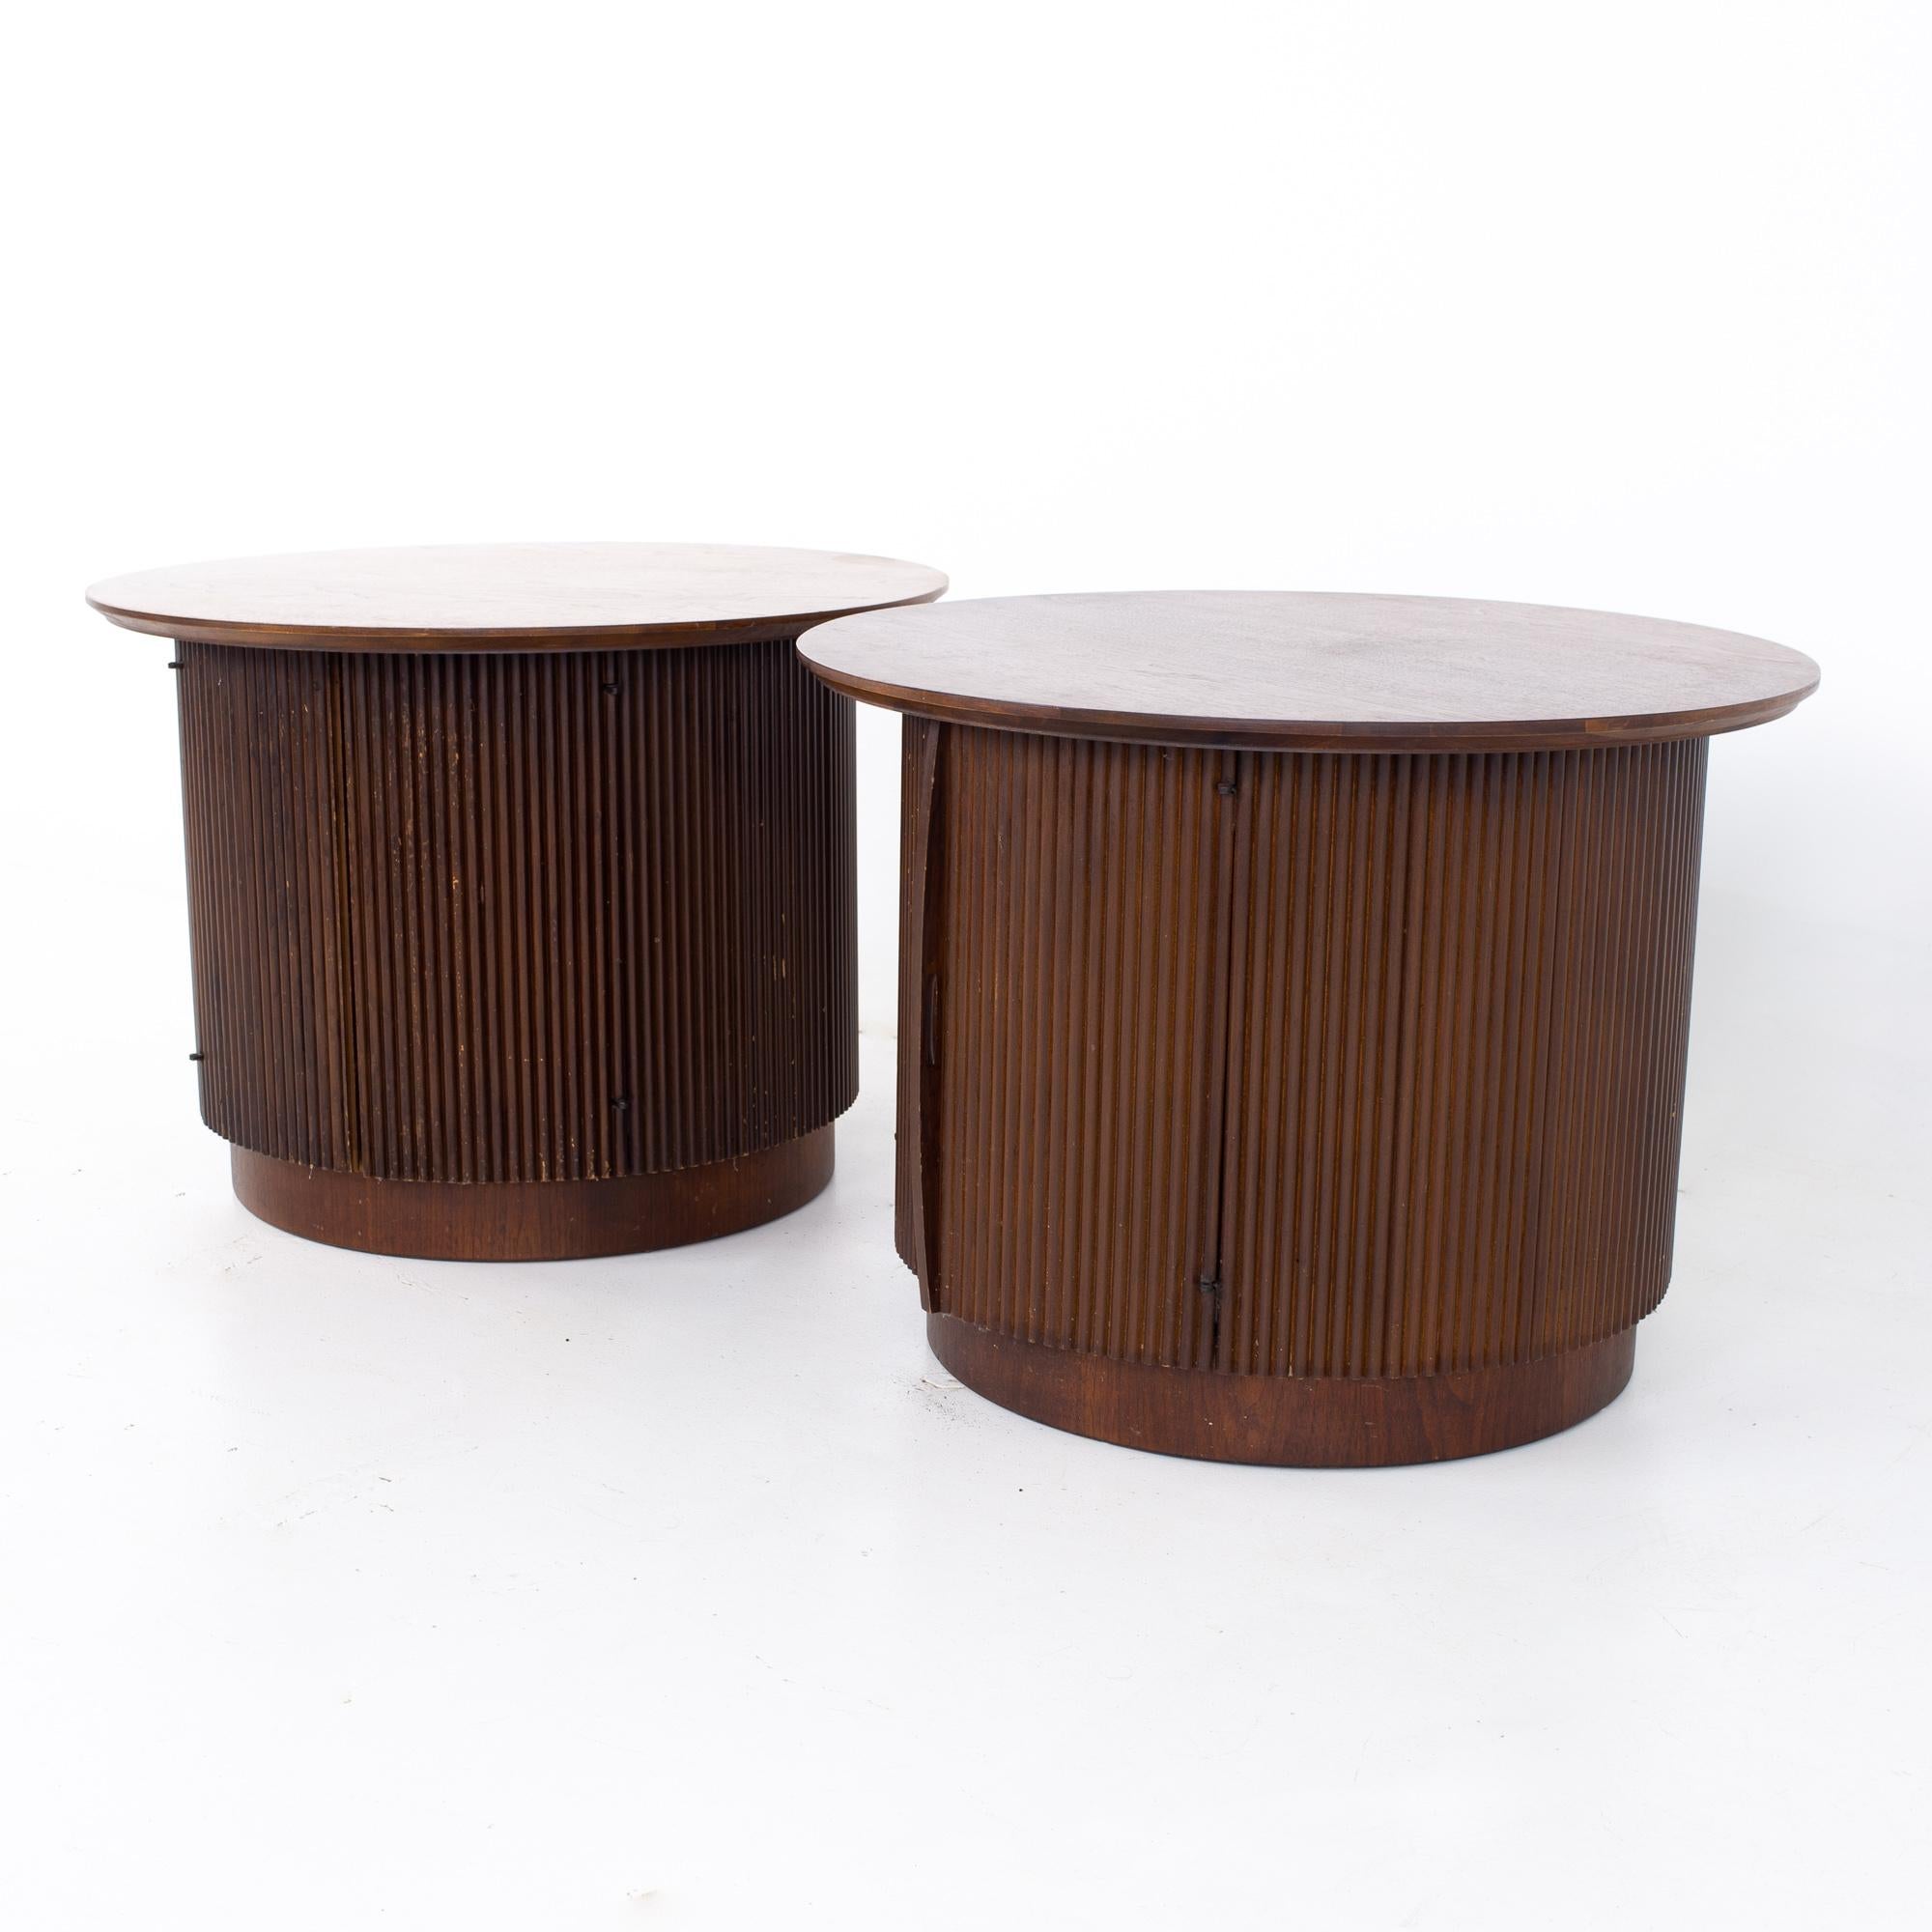 Lane First Edition mid century round cabinet end tables - a pair
Each table measures: 28 wide x 28 deep x 20.25 inches high

All pieces of furniture can be had in what we call restored vintage condition. That means the piece is restored upon